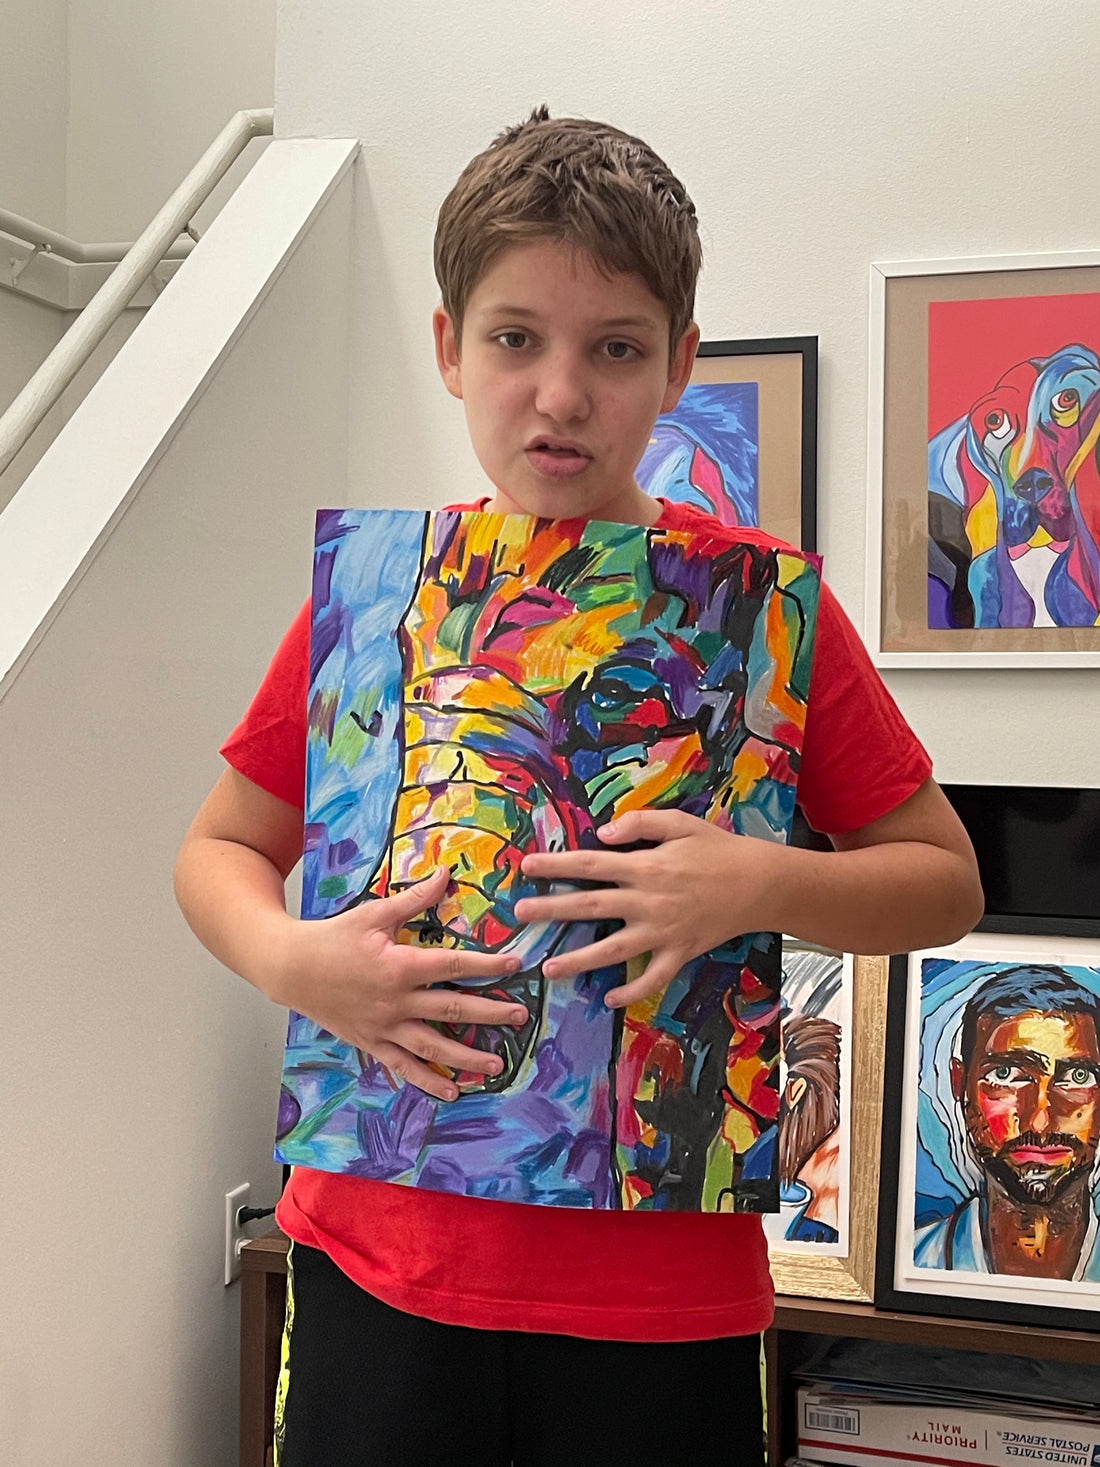 Nonverbal 12-year-old boy with autism unlocks artistic gift during pandemic